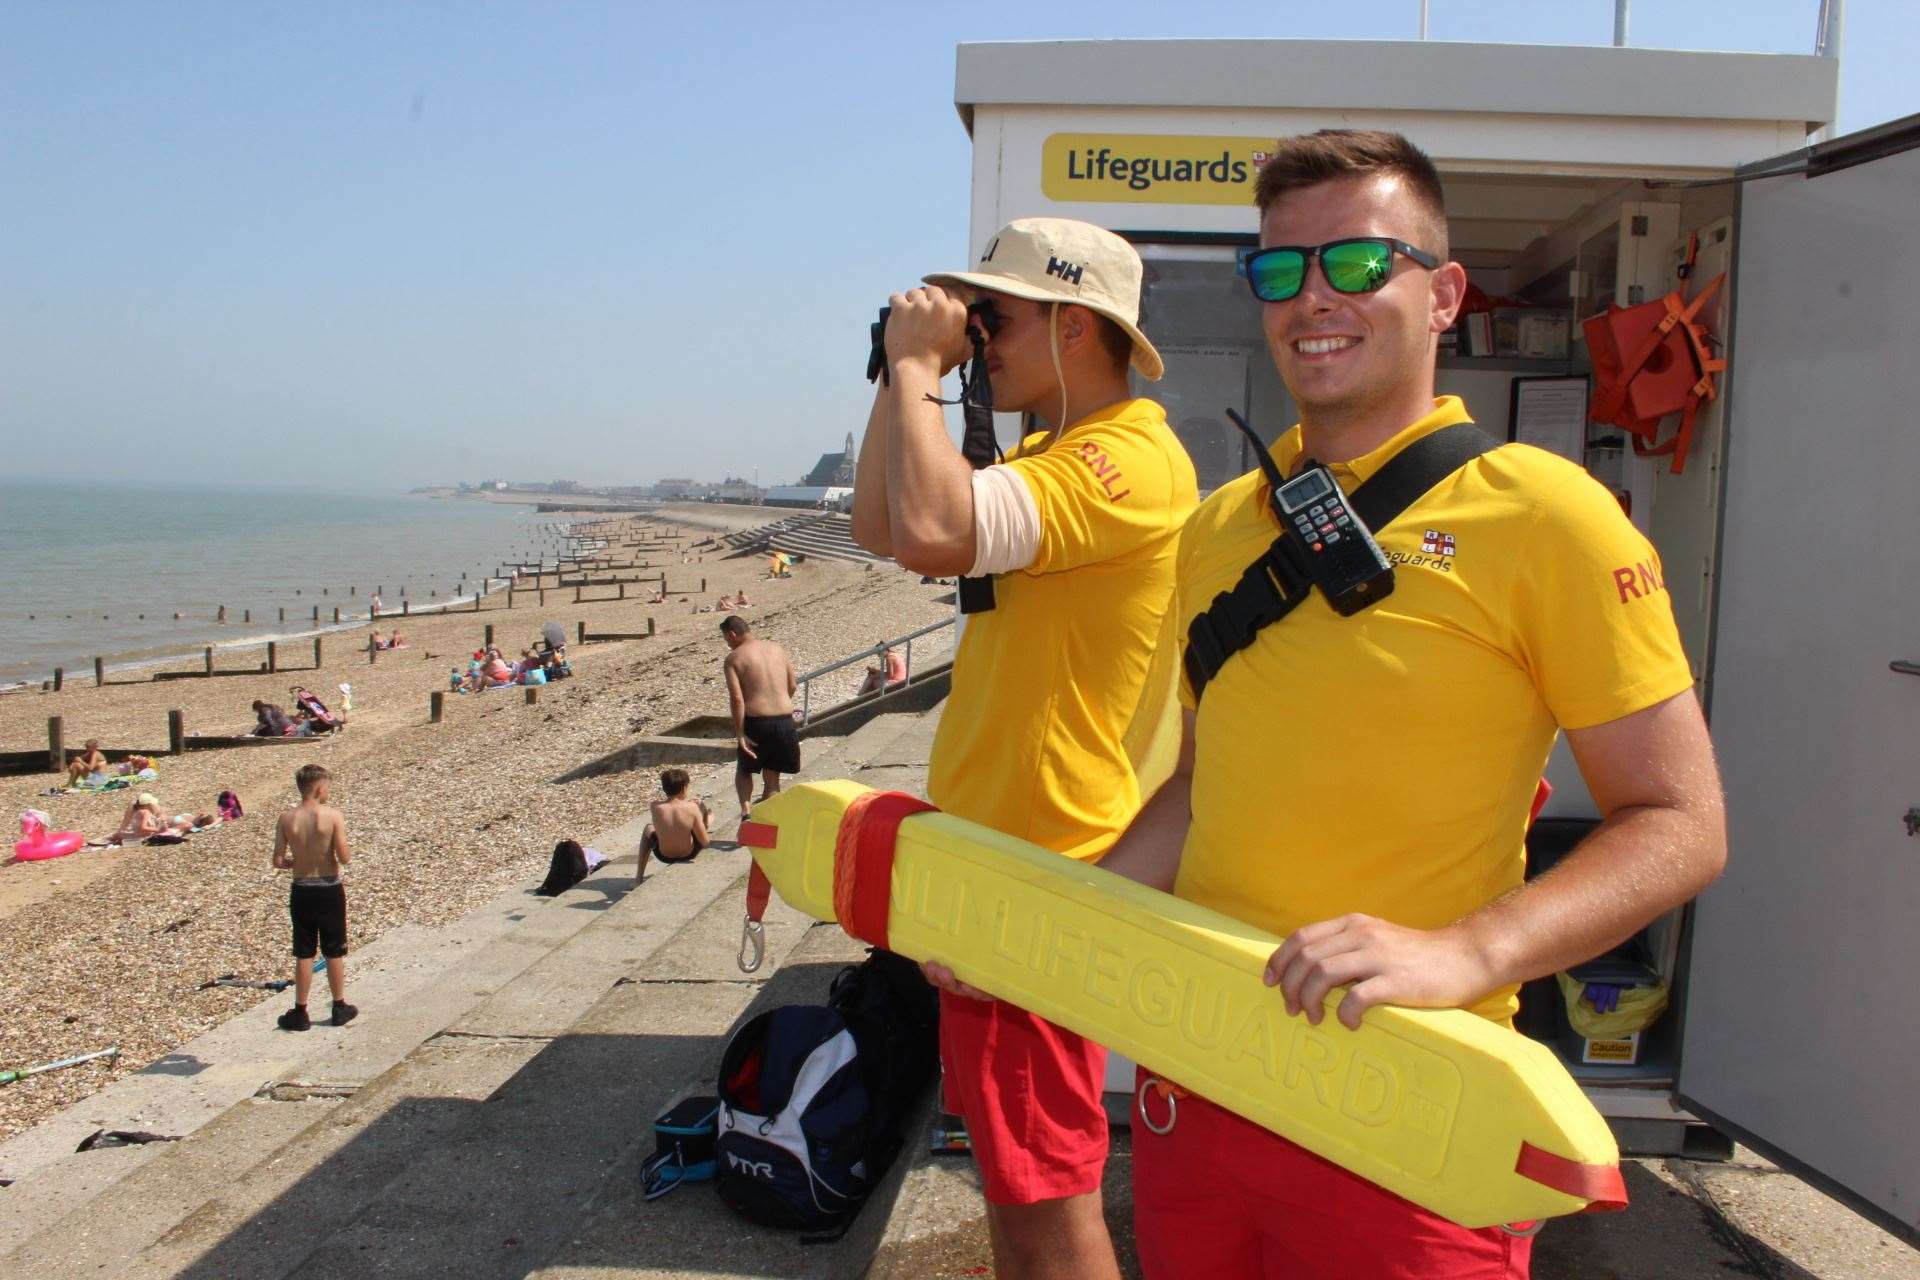 The RNLI is asking people to use lifeguarded beaches. Picture: John Nurden